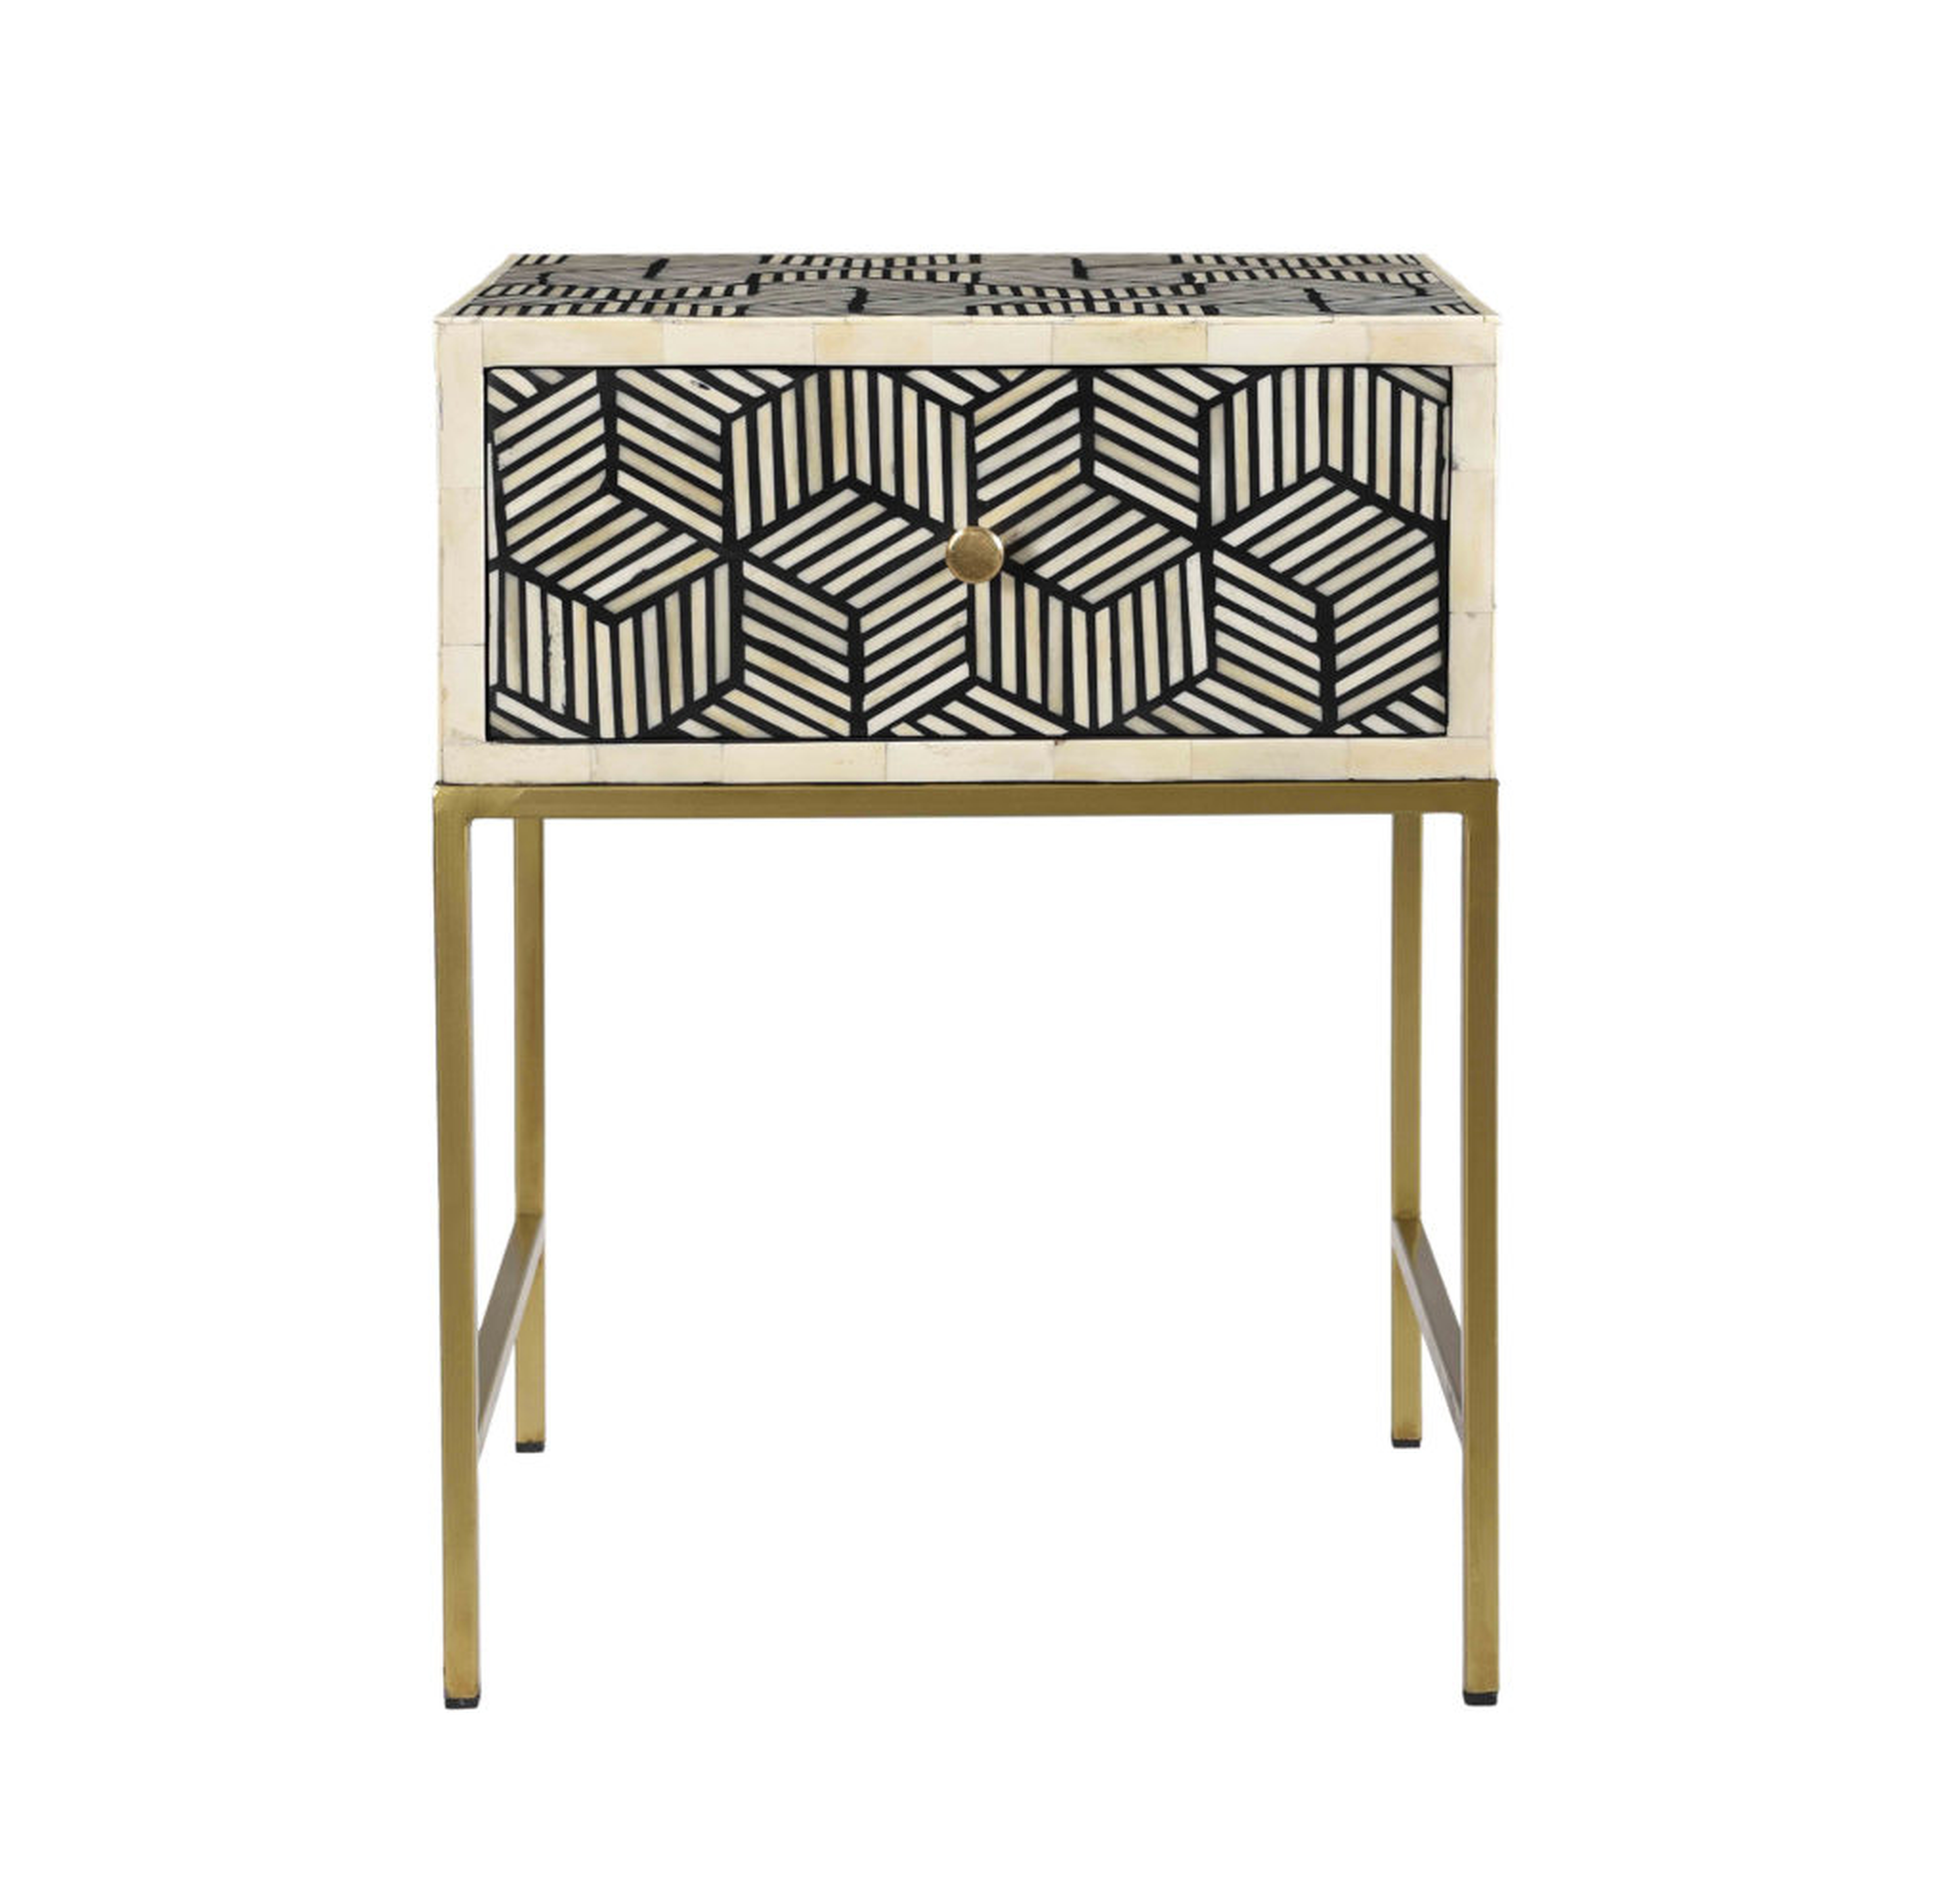 Emilia Inlay Side Table - Maren Home